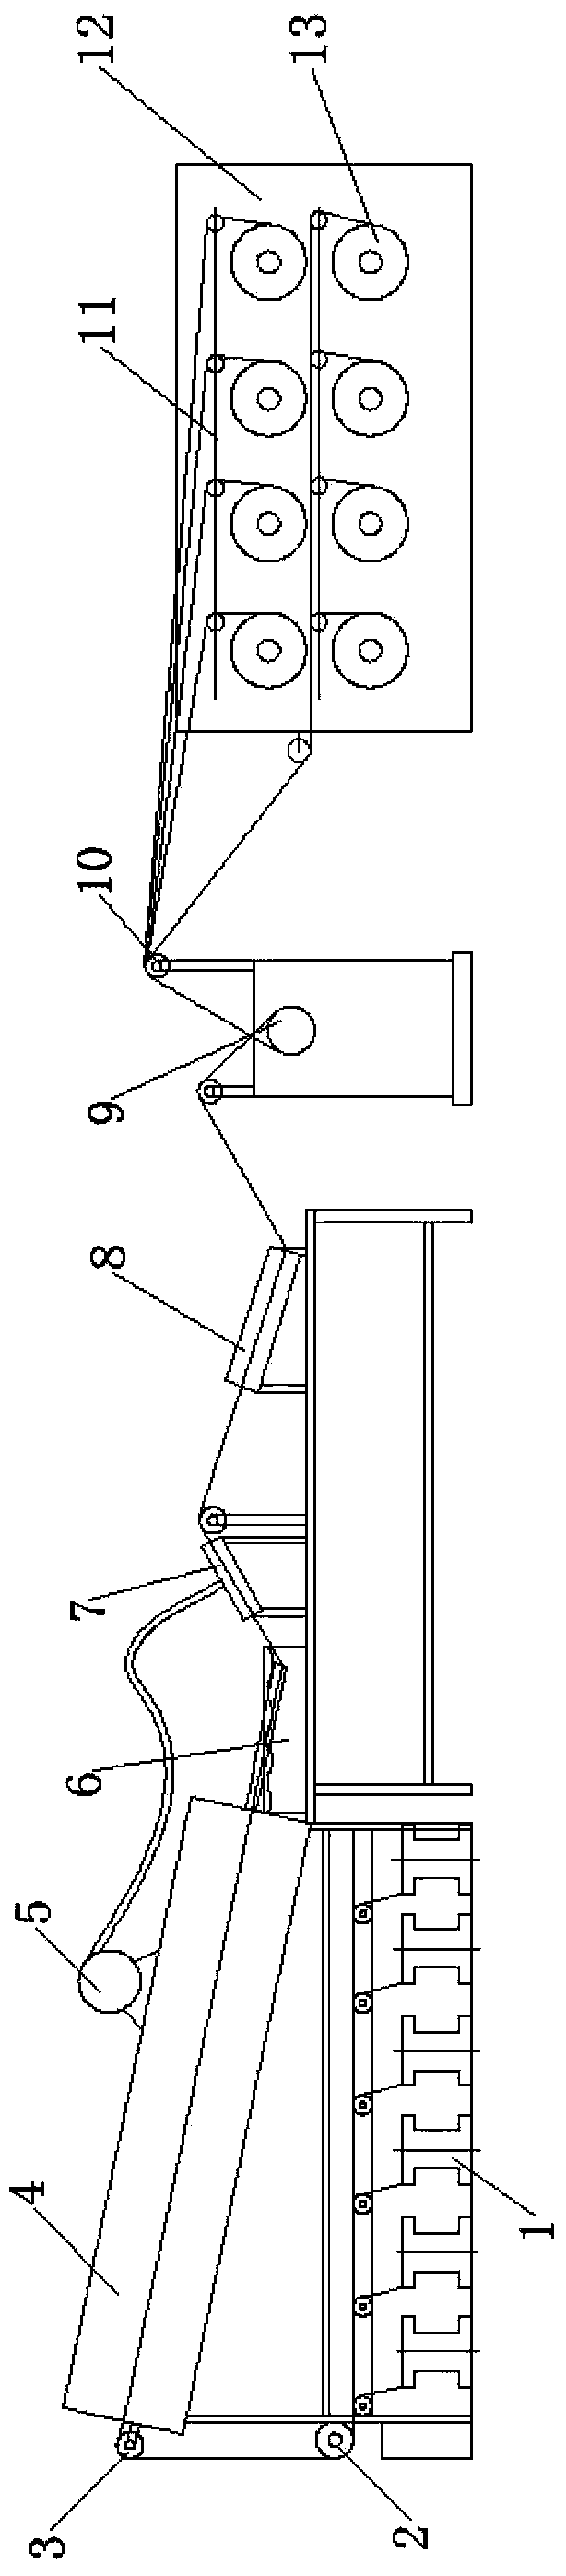 System and method for intelligently controlling tube continuous annealing furnaces